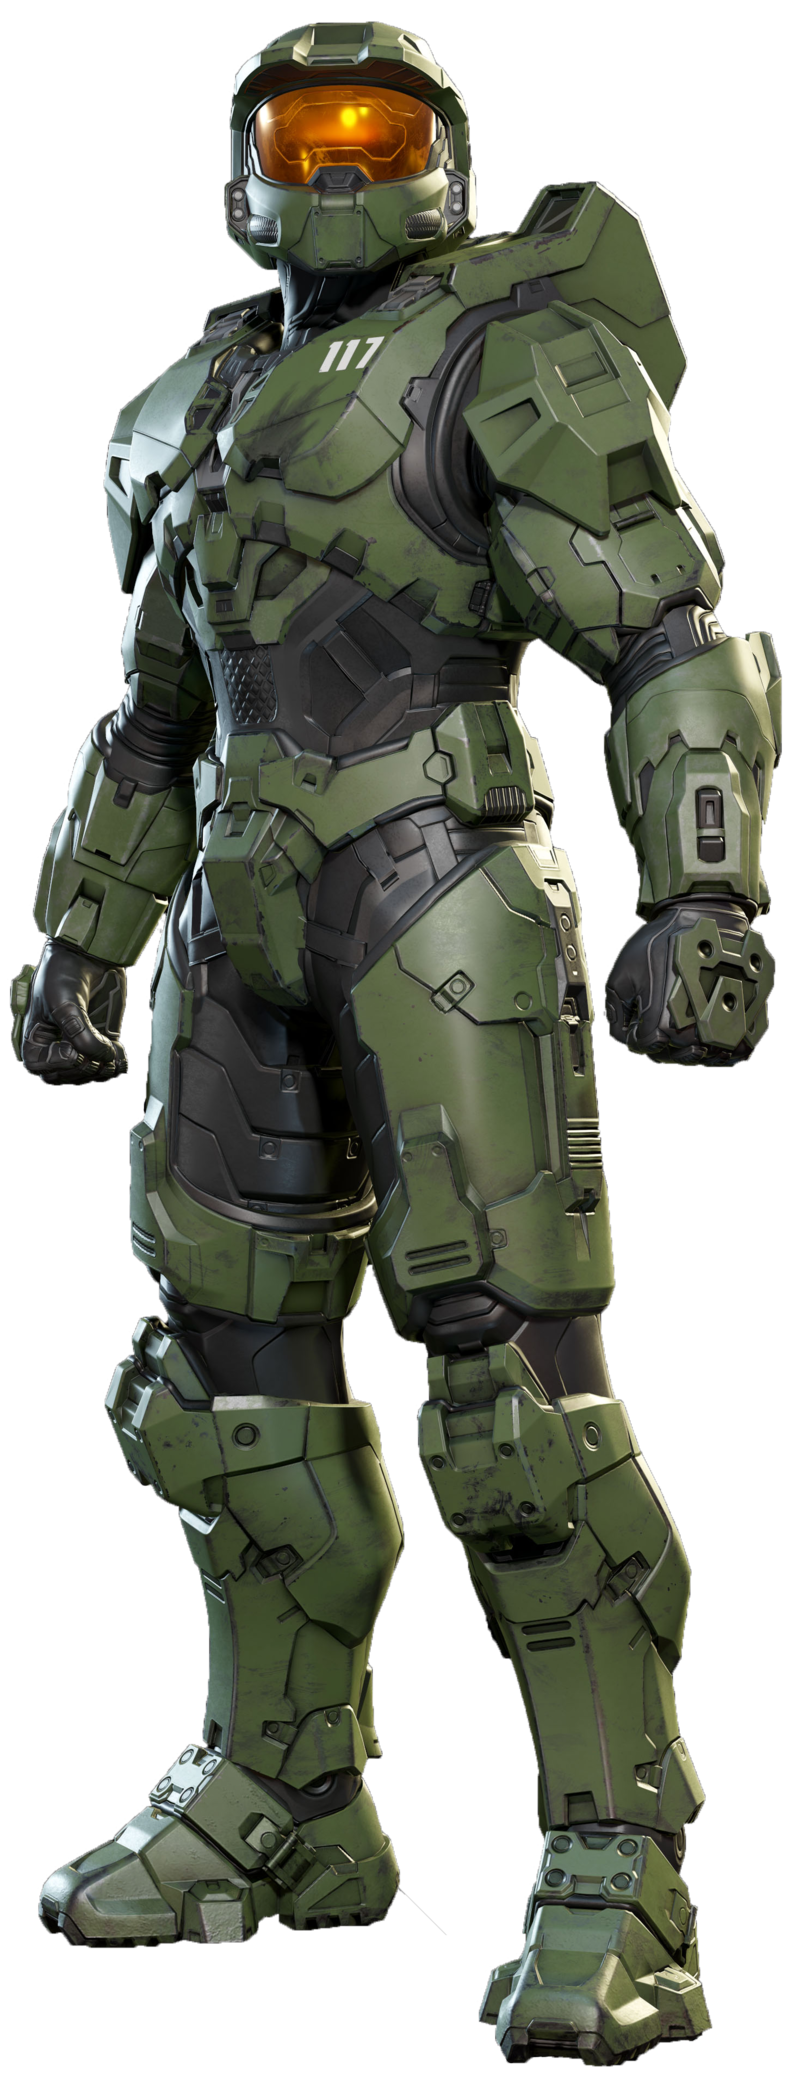 Filehinf Character Master Chief Renderpng Halopedia The Halo Wiki